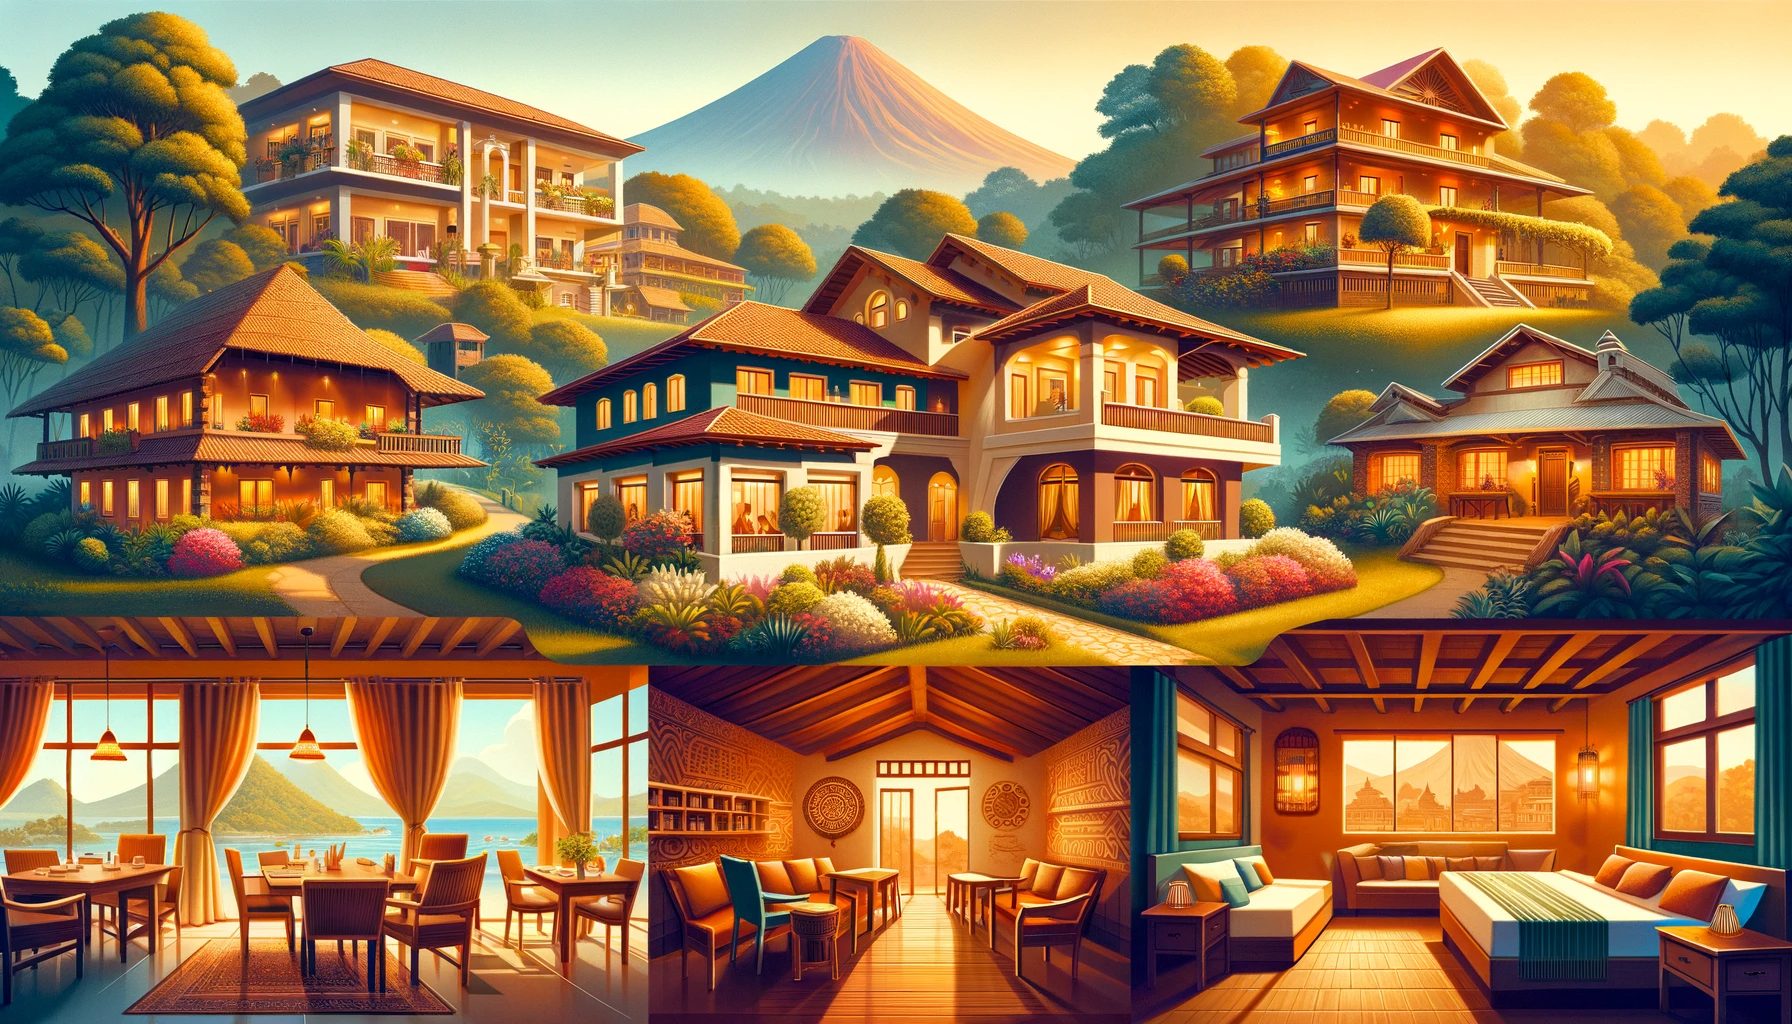 Idyllic hillside homes with interior views and mountain background.